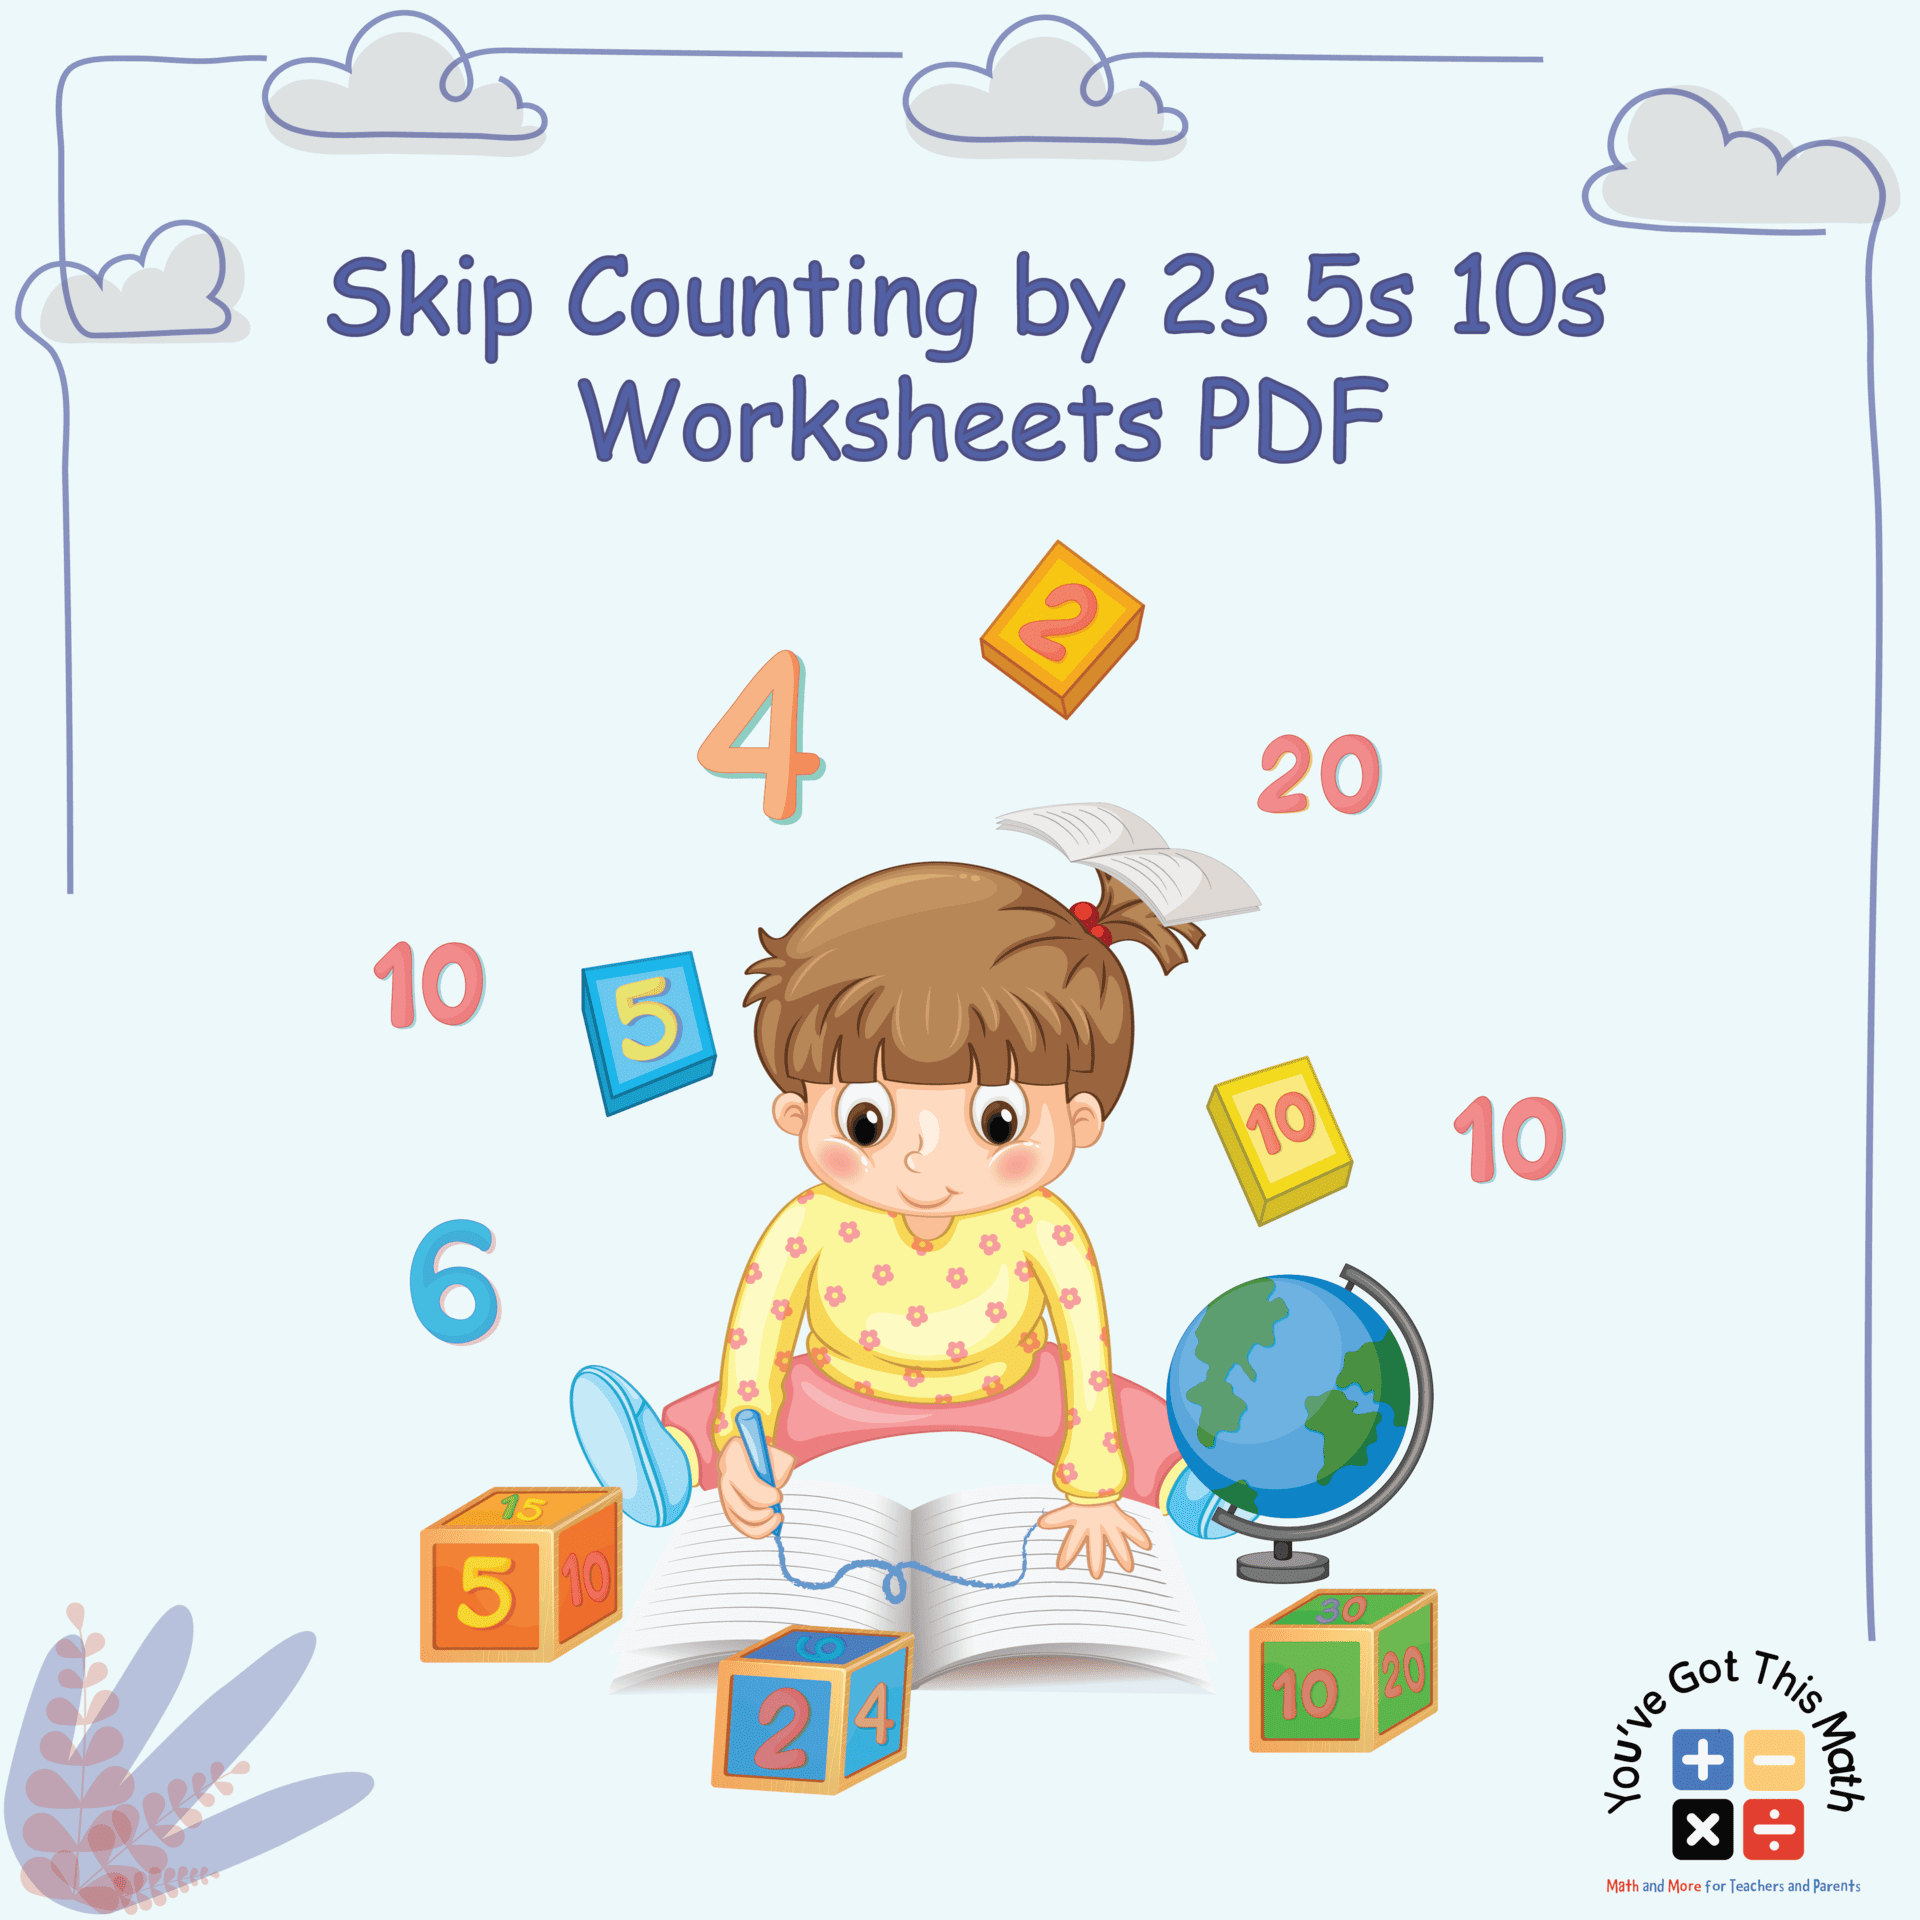 12 Free Skip Counting by 2s 5s 10s Worksheets PDF